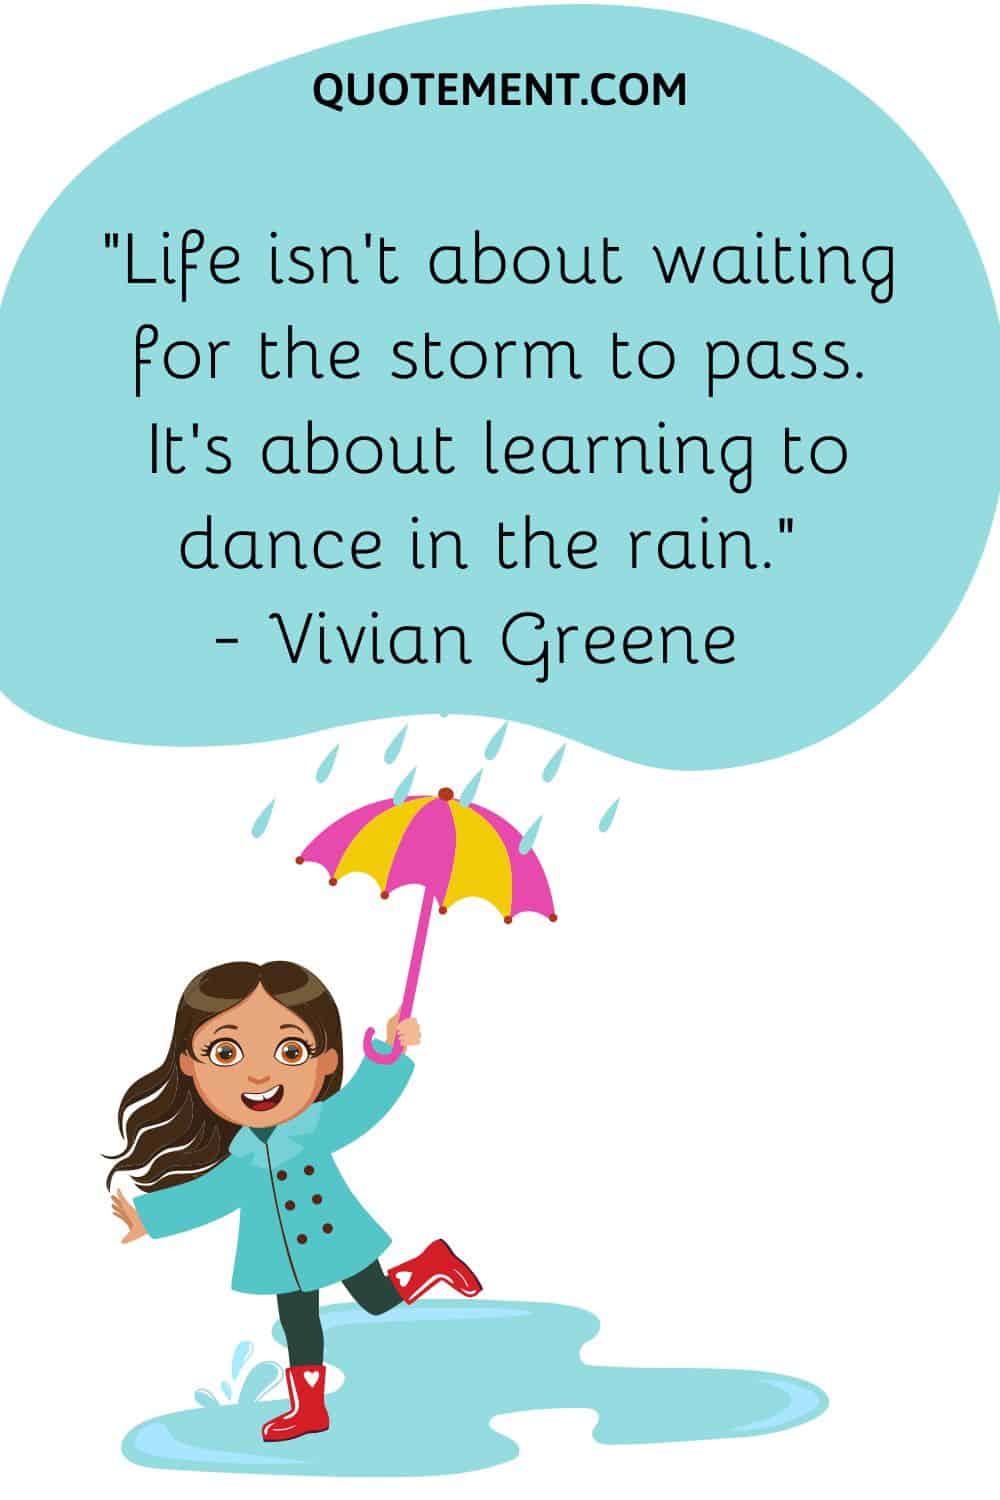 Life isn’t about waiting for the storm to pass. It’s about learning to dance in the rain